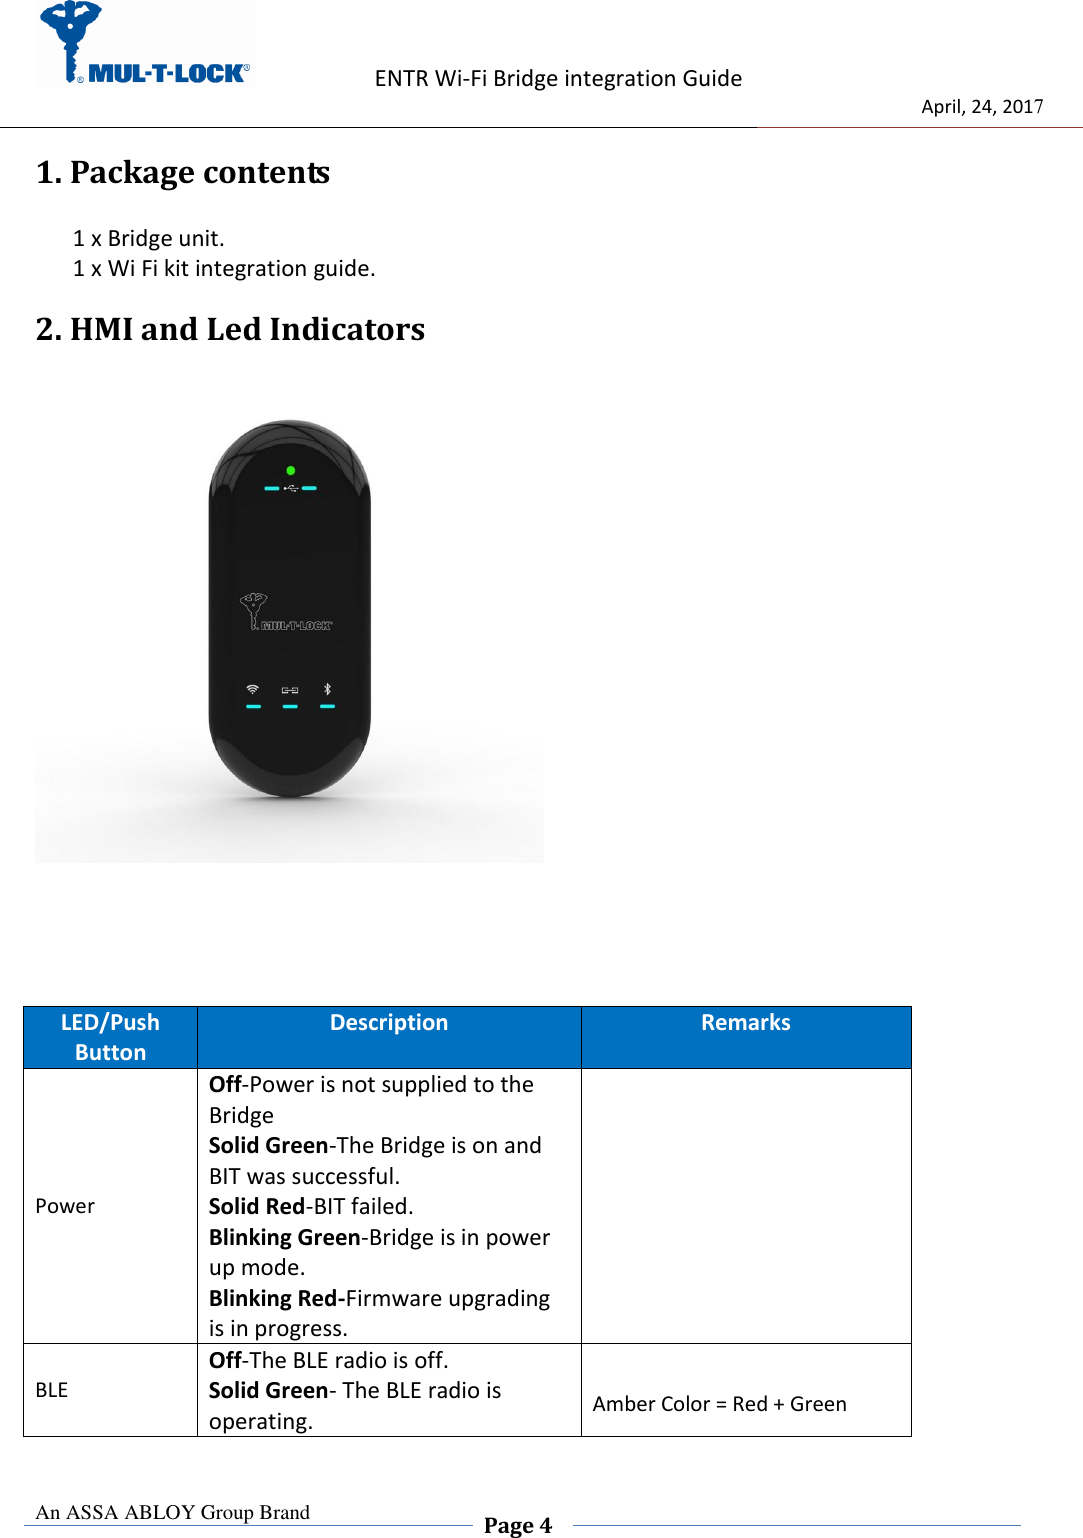                    ENTR Wi-Fi Bridge integration Guide                                  April, 24, 2017  An ASSA ABLOY Group Brand  Page 4    1. Package contents   1 x Bridge unit. 1 x Wi Fi kit integration guide. 2. HMI and Led Indicators           LED/Push Button Description Remarks Power Off-Power is not supplied to the Bridge Solid Green-The Bridge is on and BIT was successful. Solid Red-BIT failed. Blinking Green-Bridge is in power up mode. Blinking Red-Firmware upgrading is in progress.  BLE Off-The BLE radio is off.  Solid Green- The BLE radio is operating.  Amber Color = Red + Green  